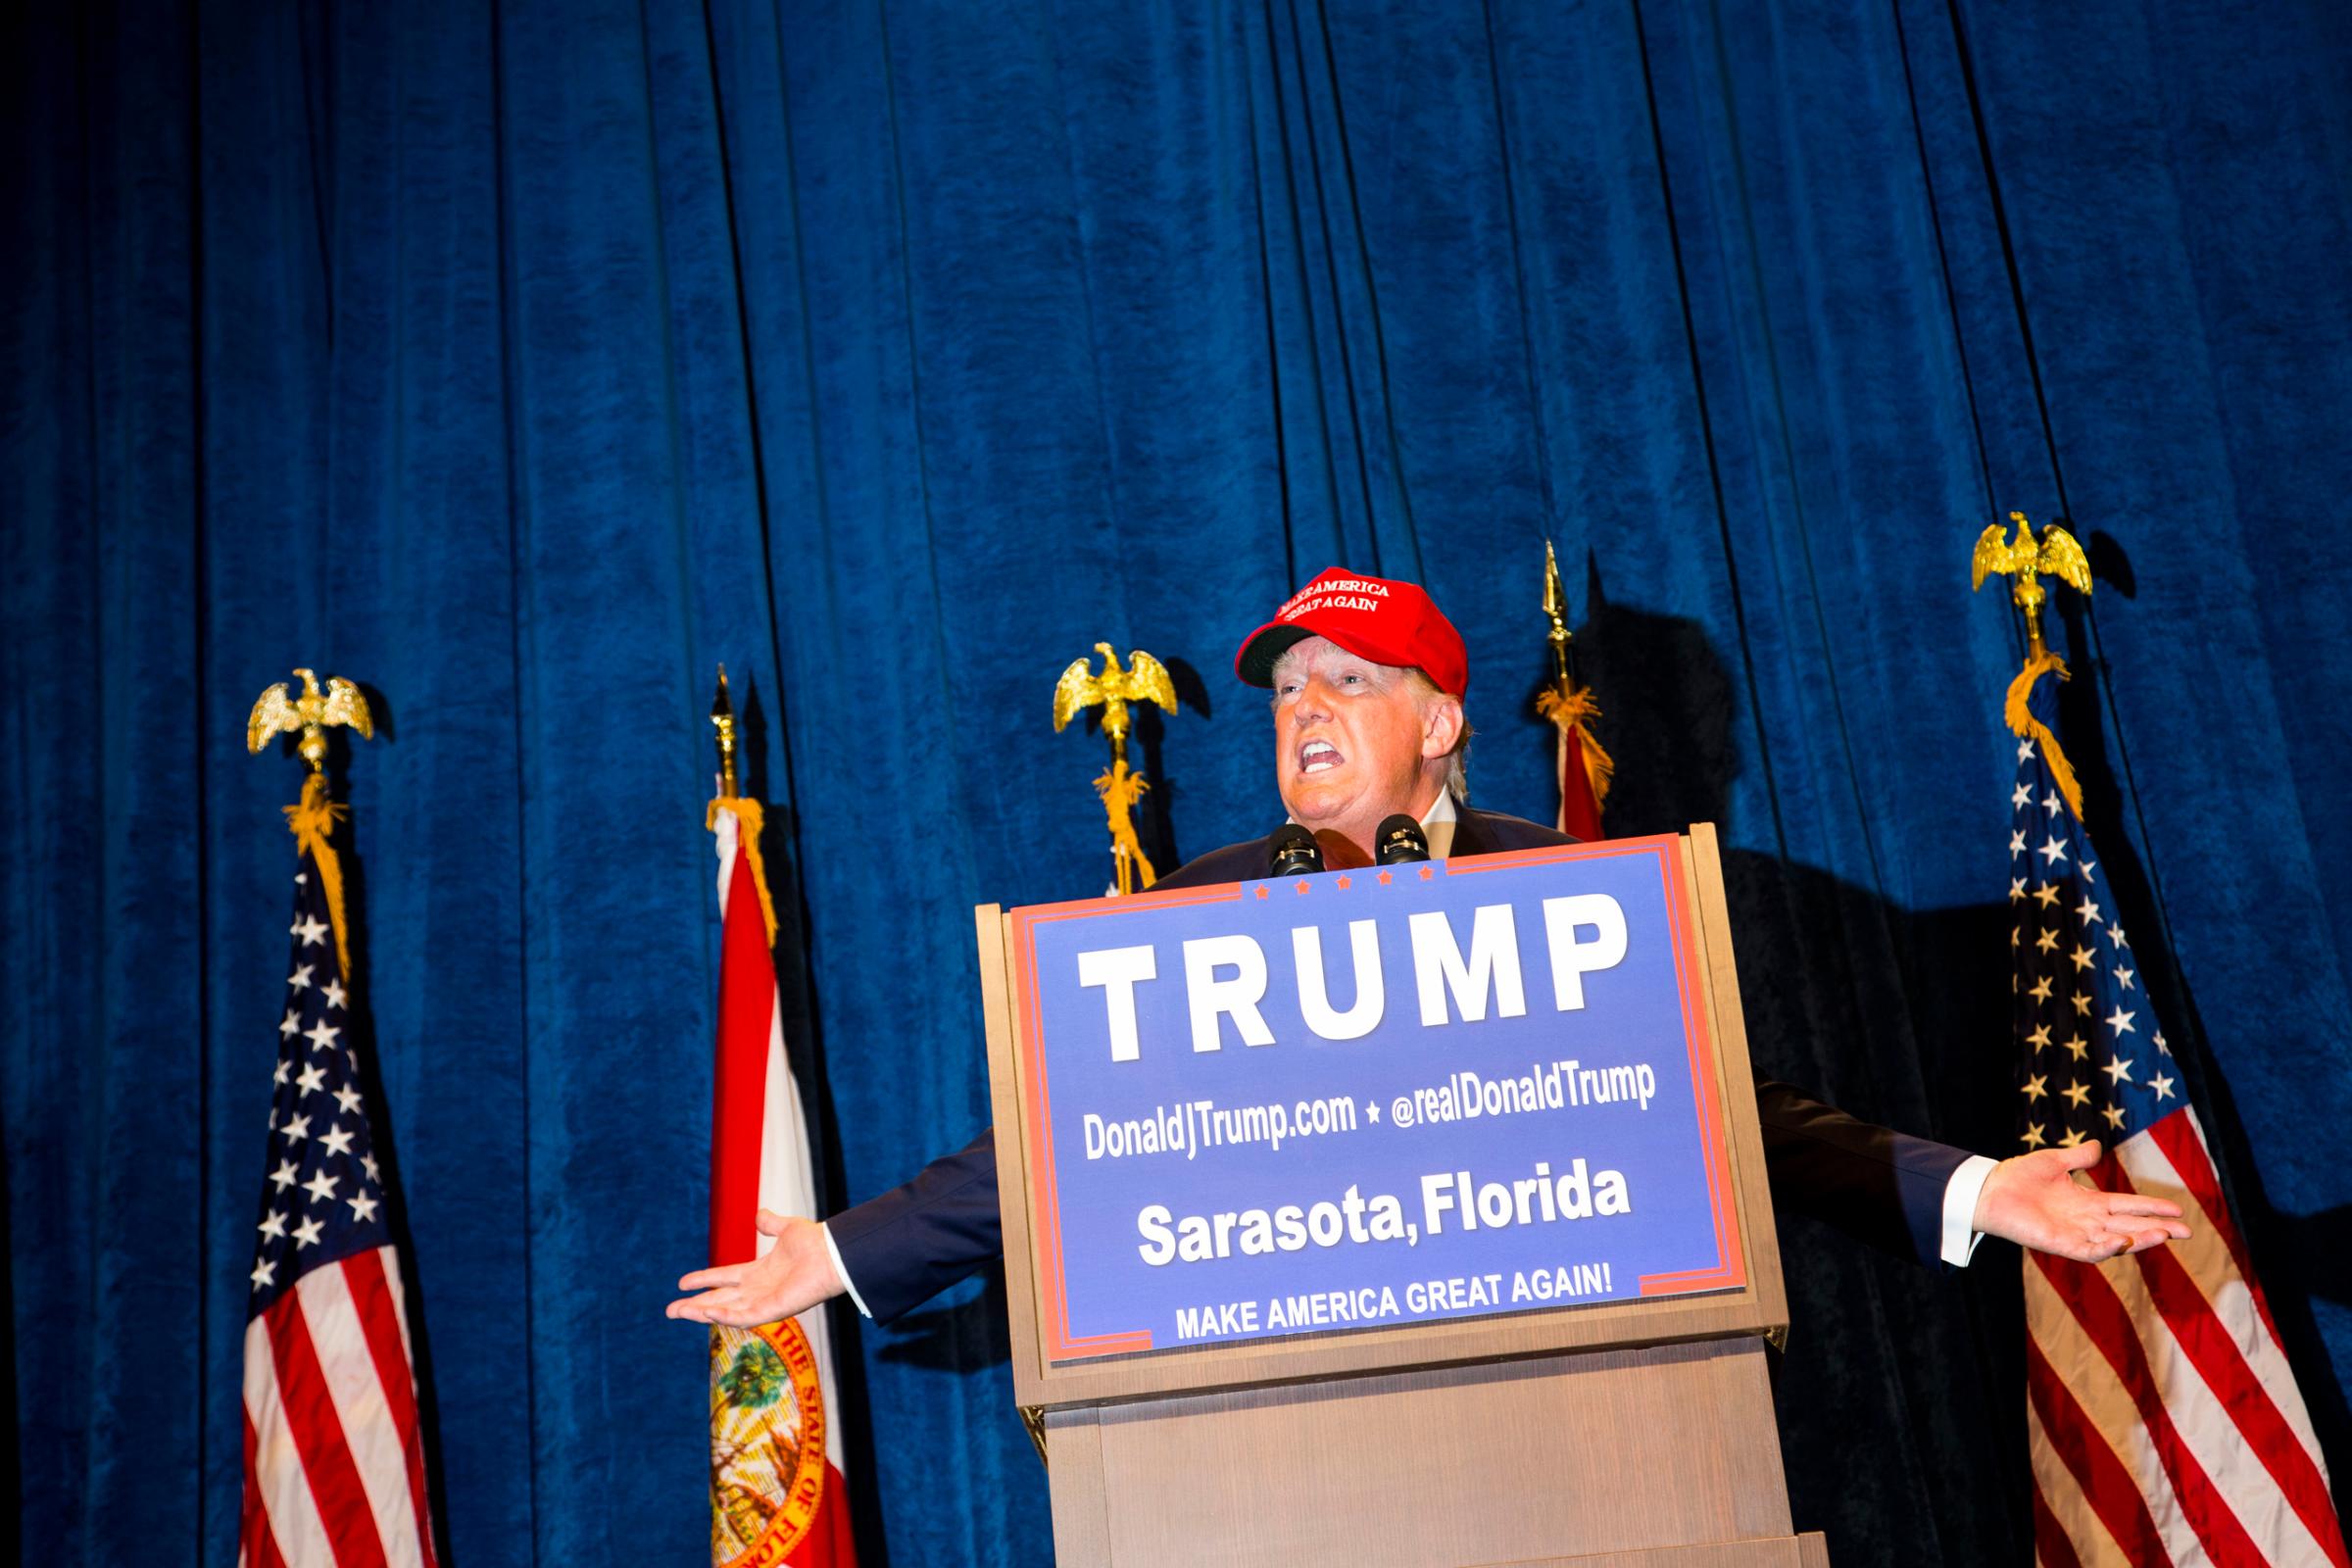 Republican presidential candidate Donald Trump speaks at a rally in Sarasota, Fla. Nov. 28, 2015.